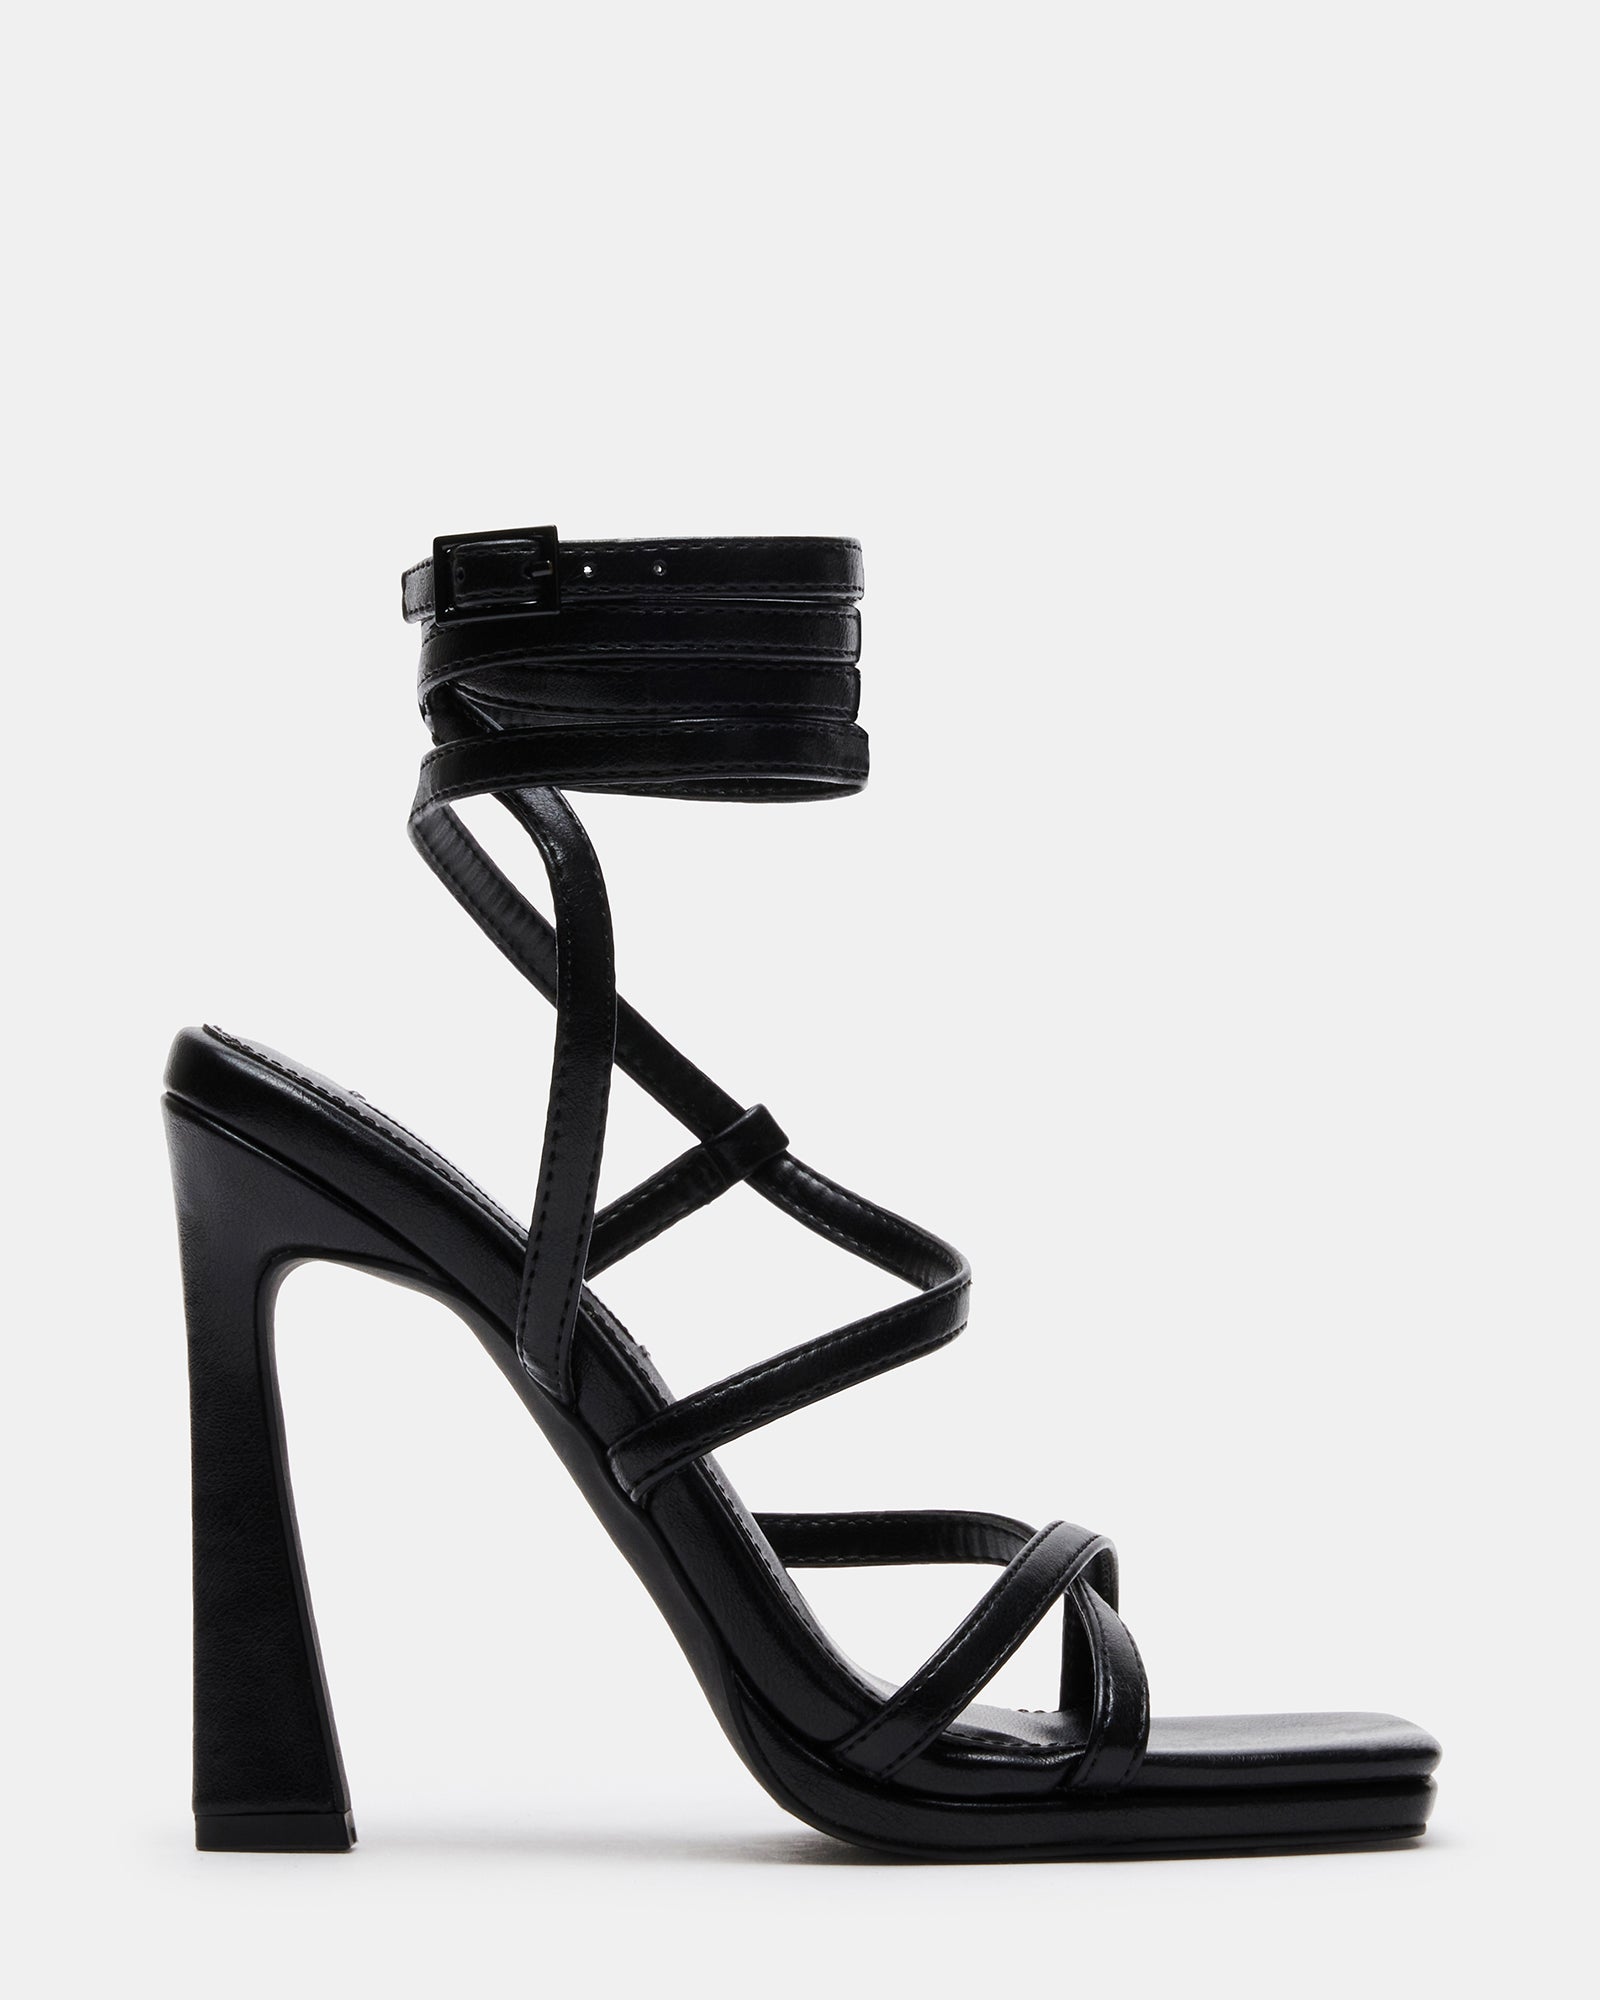 Black Strappy Sandals By Iced Black Silver – Onex Shoes